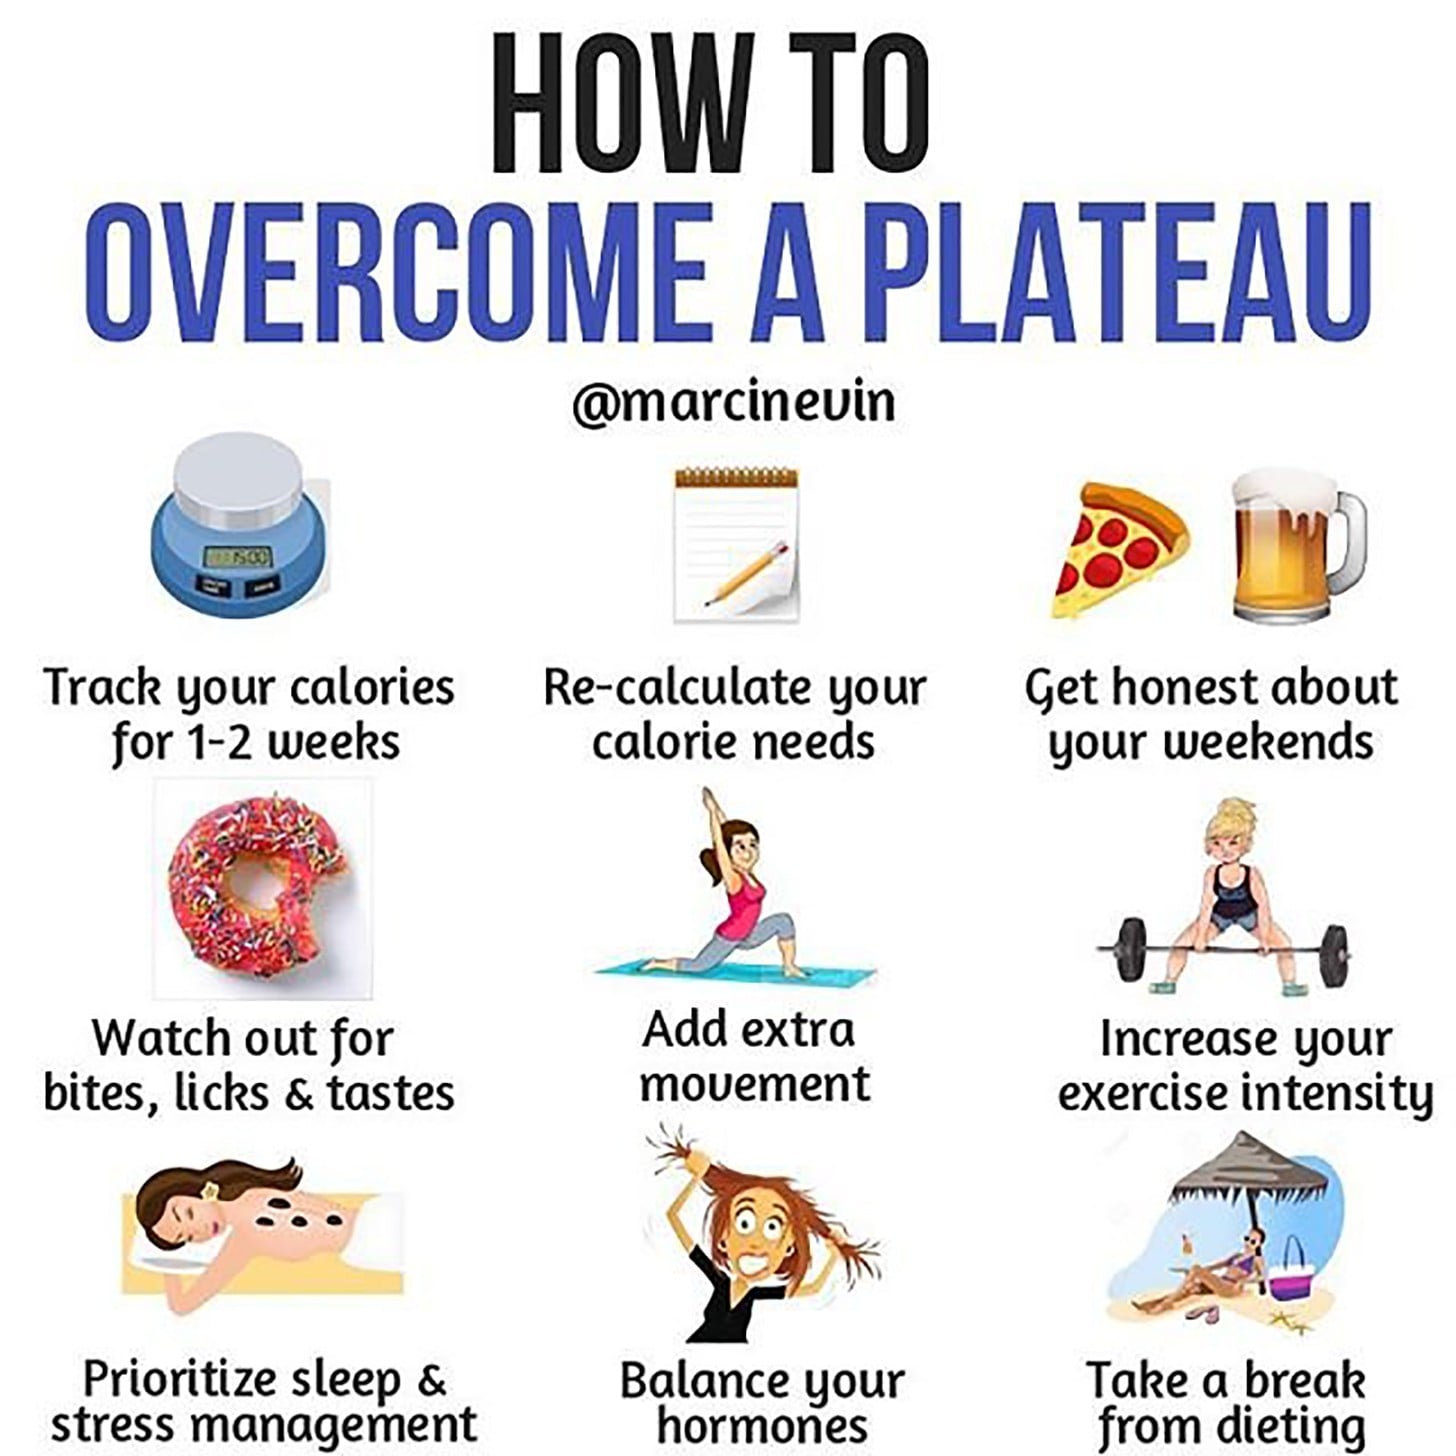 Weight loss plateaus are normal